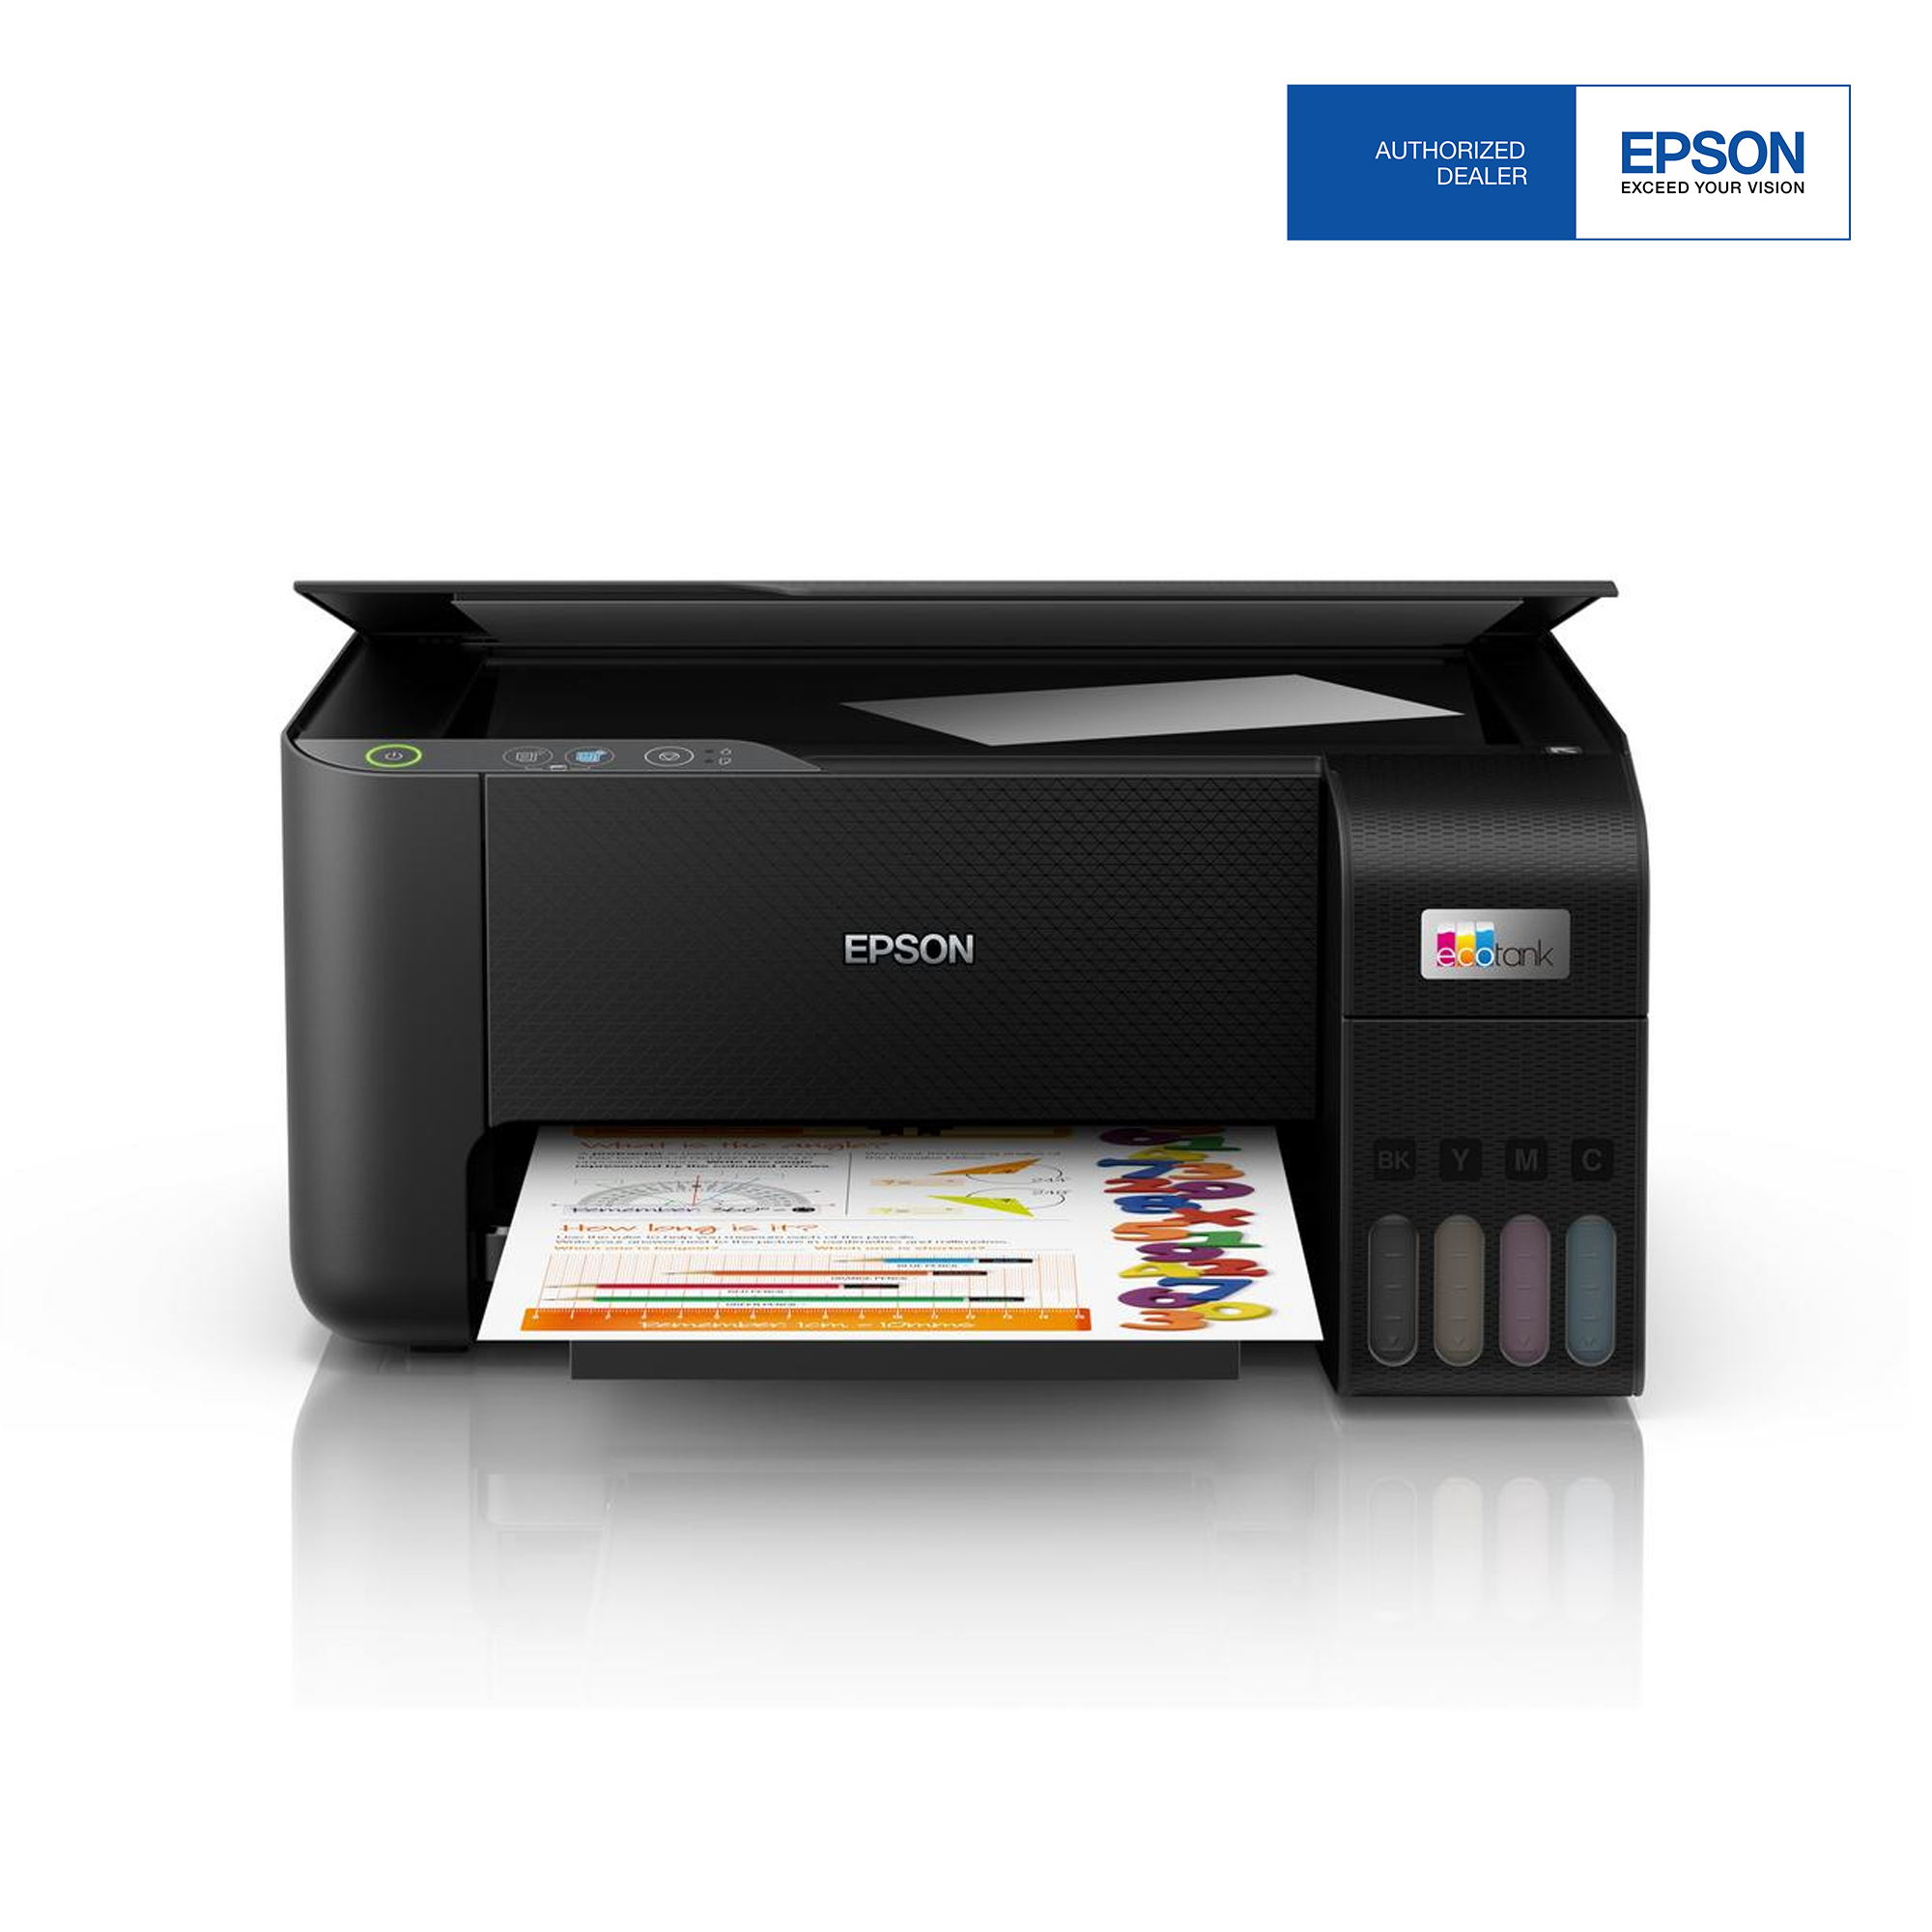 epson ecotank l3210 a4 all in one ink tank printer